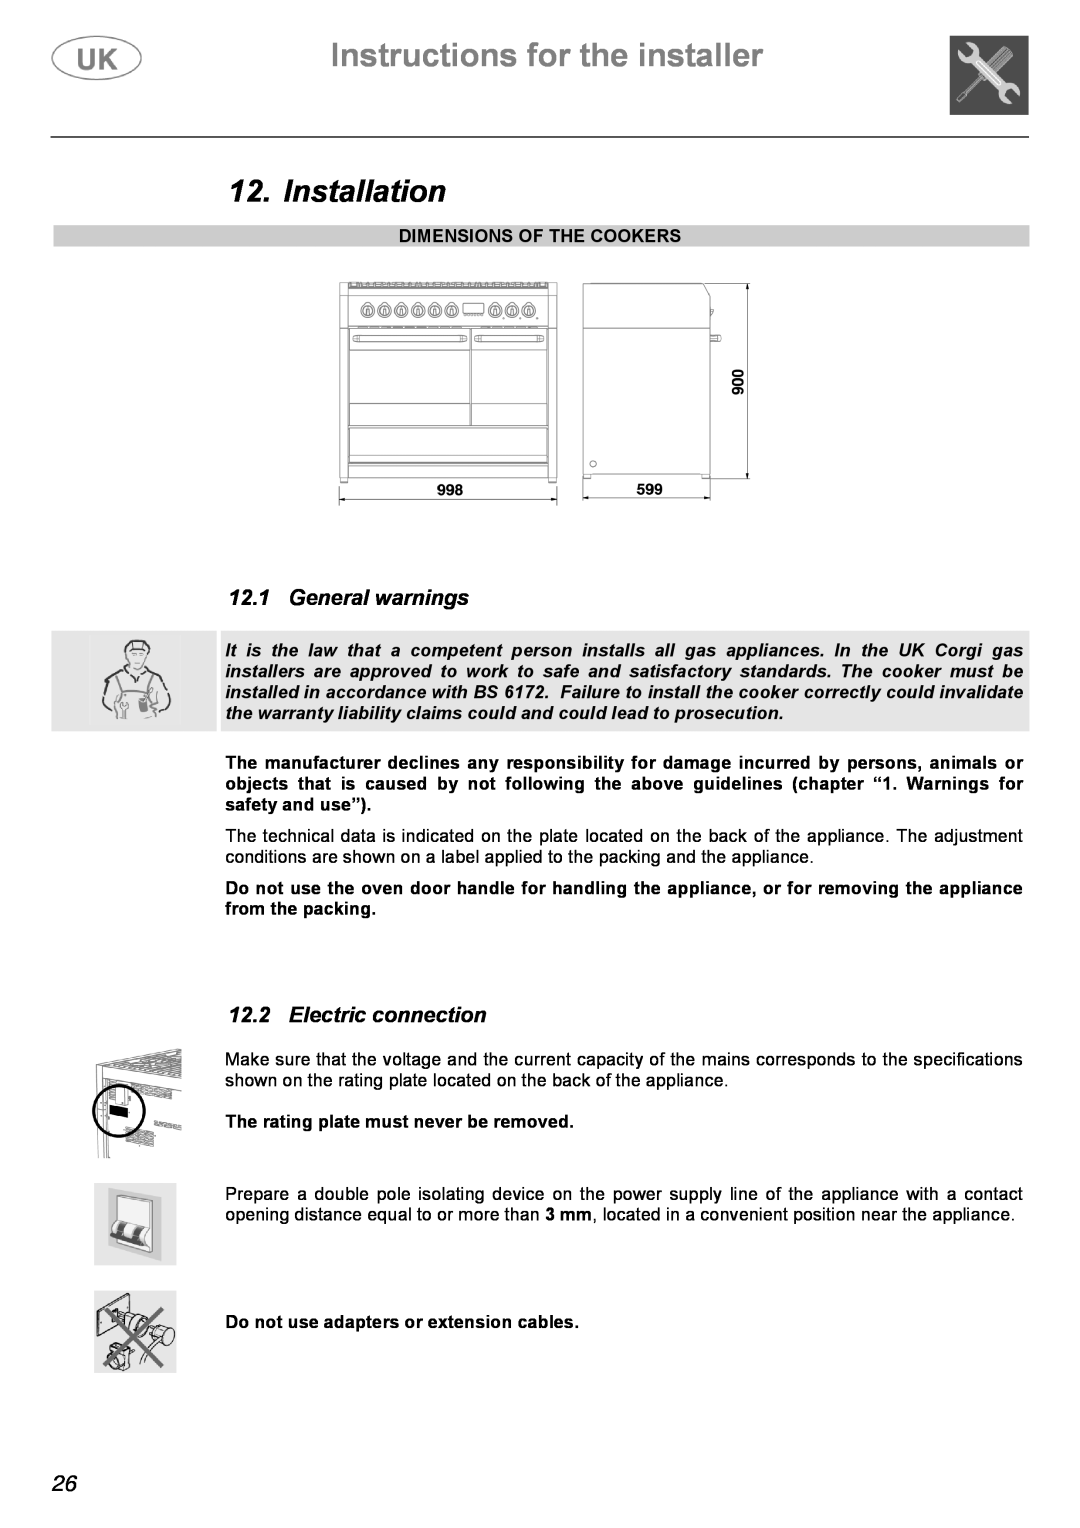 AEG C41022V Instructions for the installer, Installation, General warnings, Electric connection, Dimensions Of The Cookers 